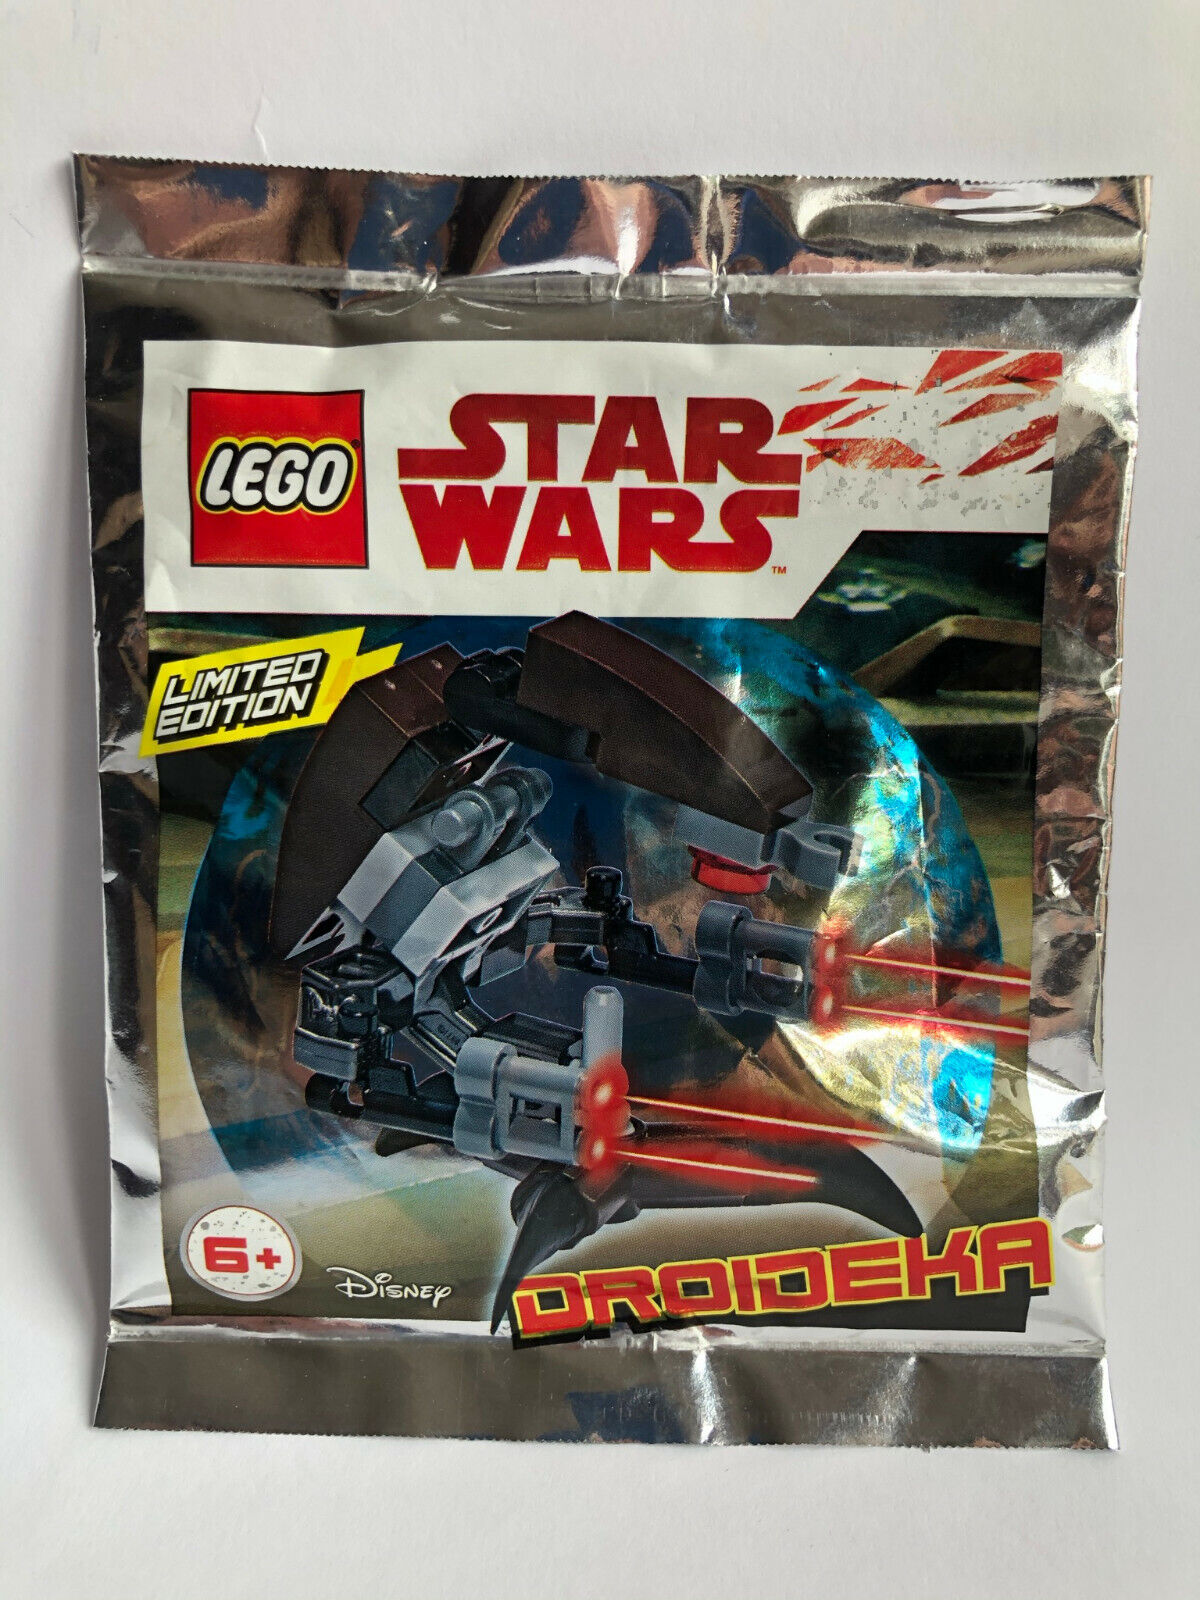 ORIGINAL LEGO STAR WARS DROIDEKA NEW PACKED 911840 LIMITED EDITION